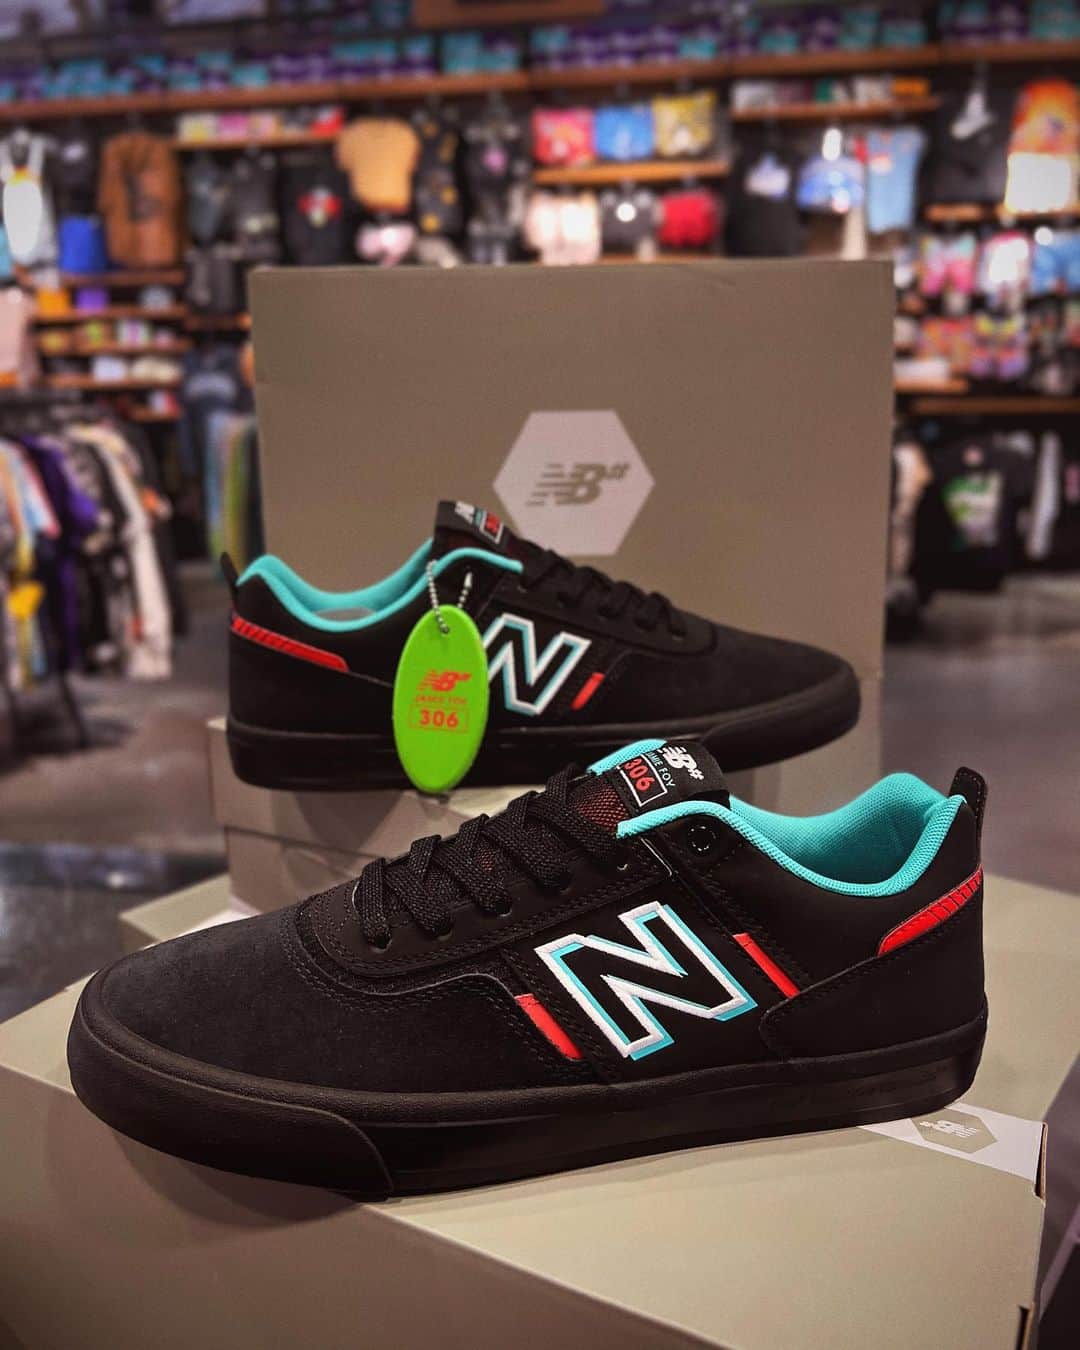 zumiezのインスタグラム：「JUST IN: @nbnumeric FOY 306 💎  We know your closet needs a shoe with this classic teal & red combo.   @zumiez #newbalance #newbalancenumeric #jamiefoy #foy306 #zumiez #sanclemente #california #ca #orangecounty #oc」